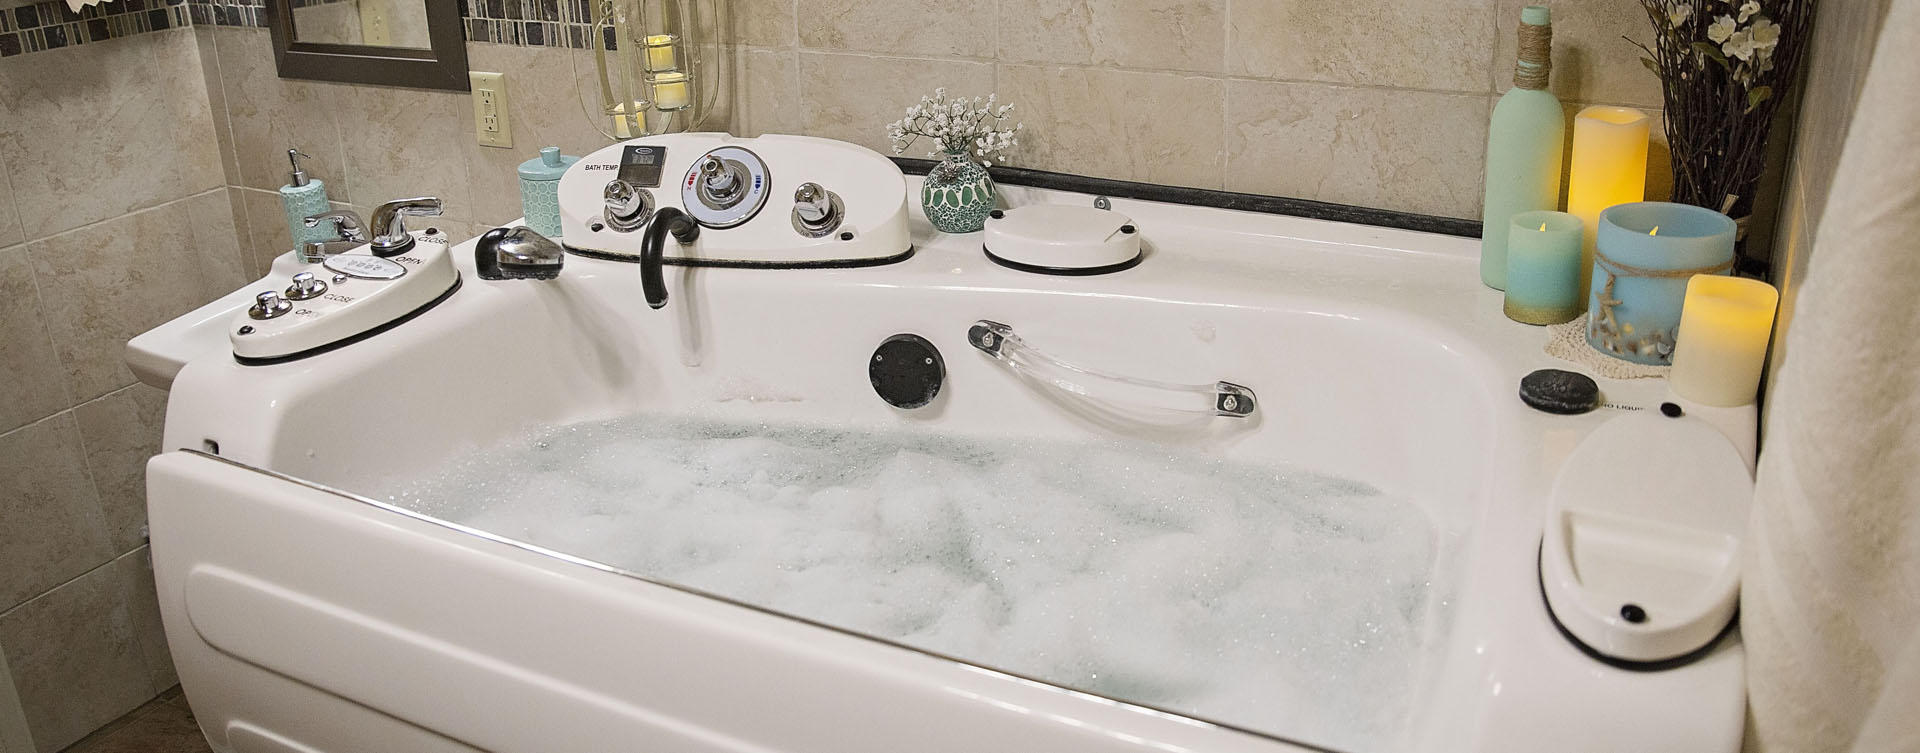 Our whirlpool bathtub creates a spa-like environment tailored to enhance your relaxation and enjoyment at Bickford of Grand Island